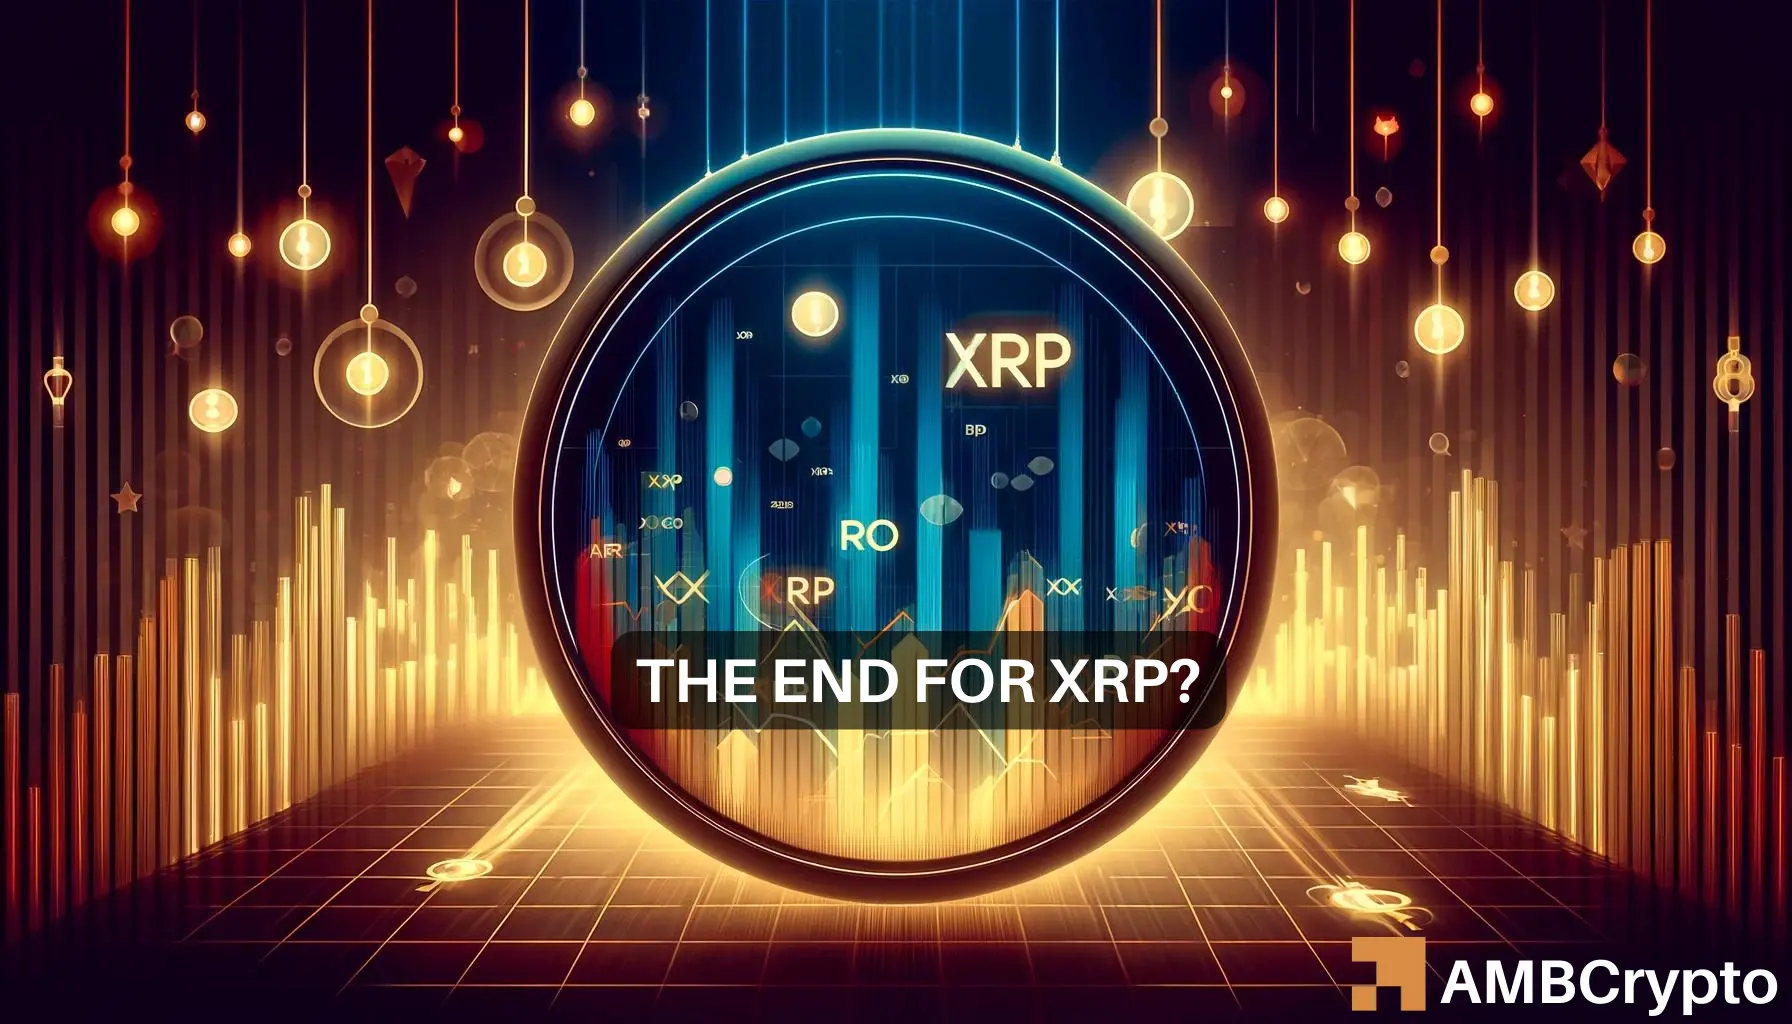 Post Bitcoin’s halving, XRP price’s could go THIS way in the next 7 days